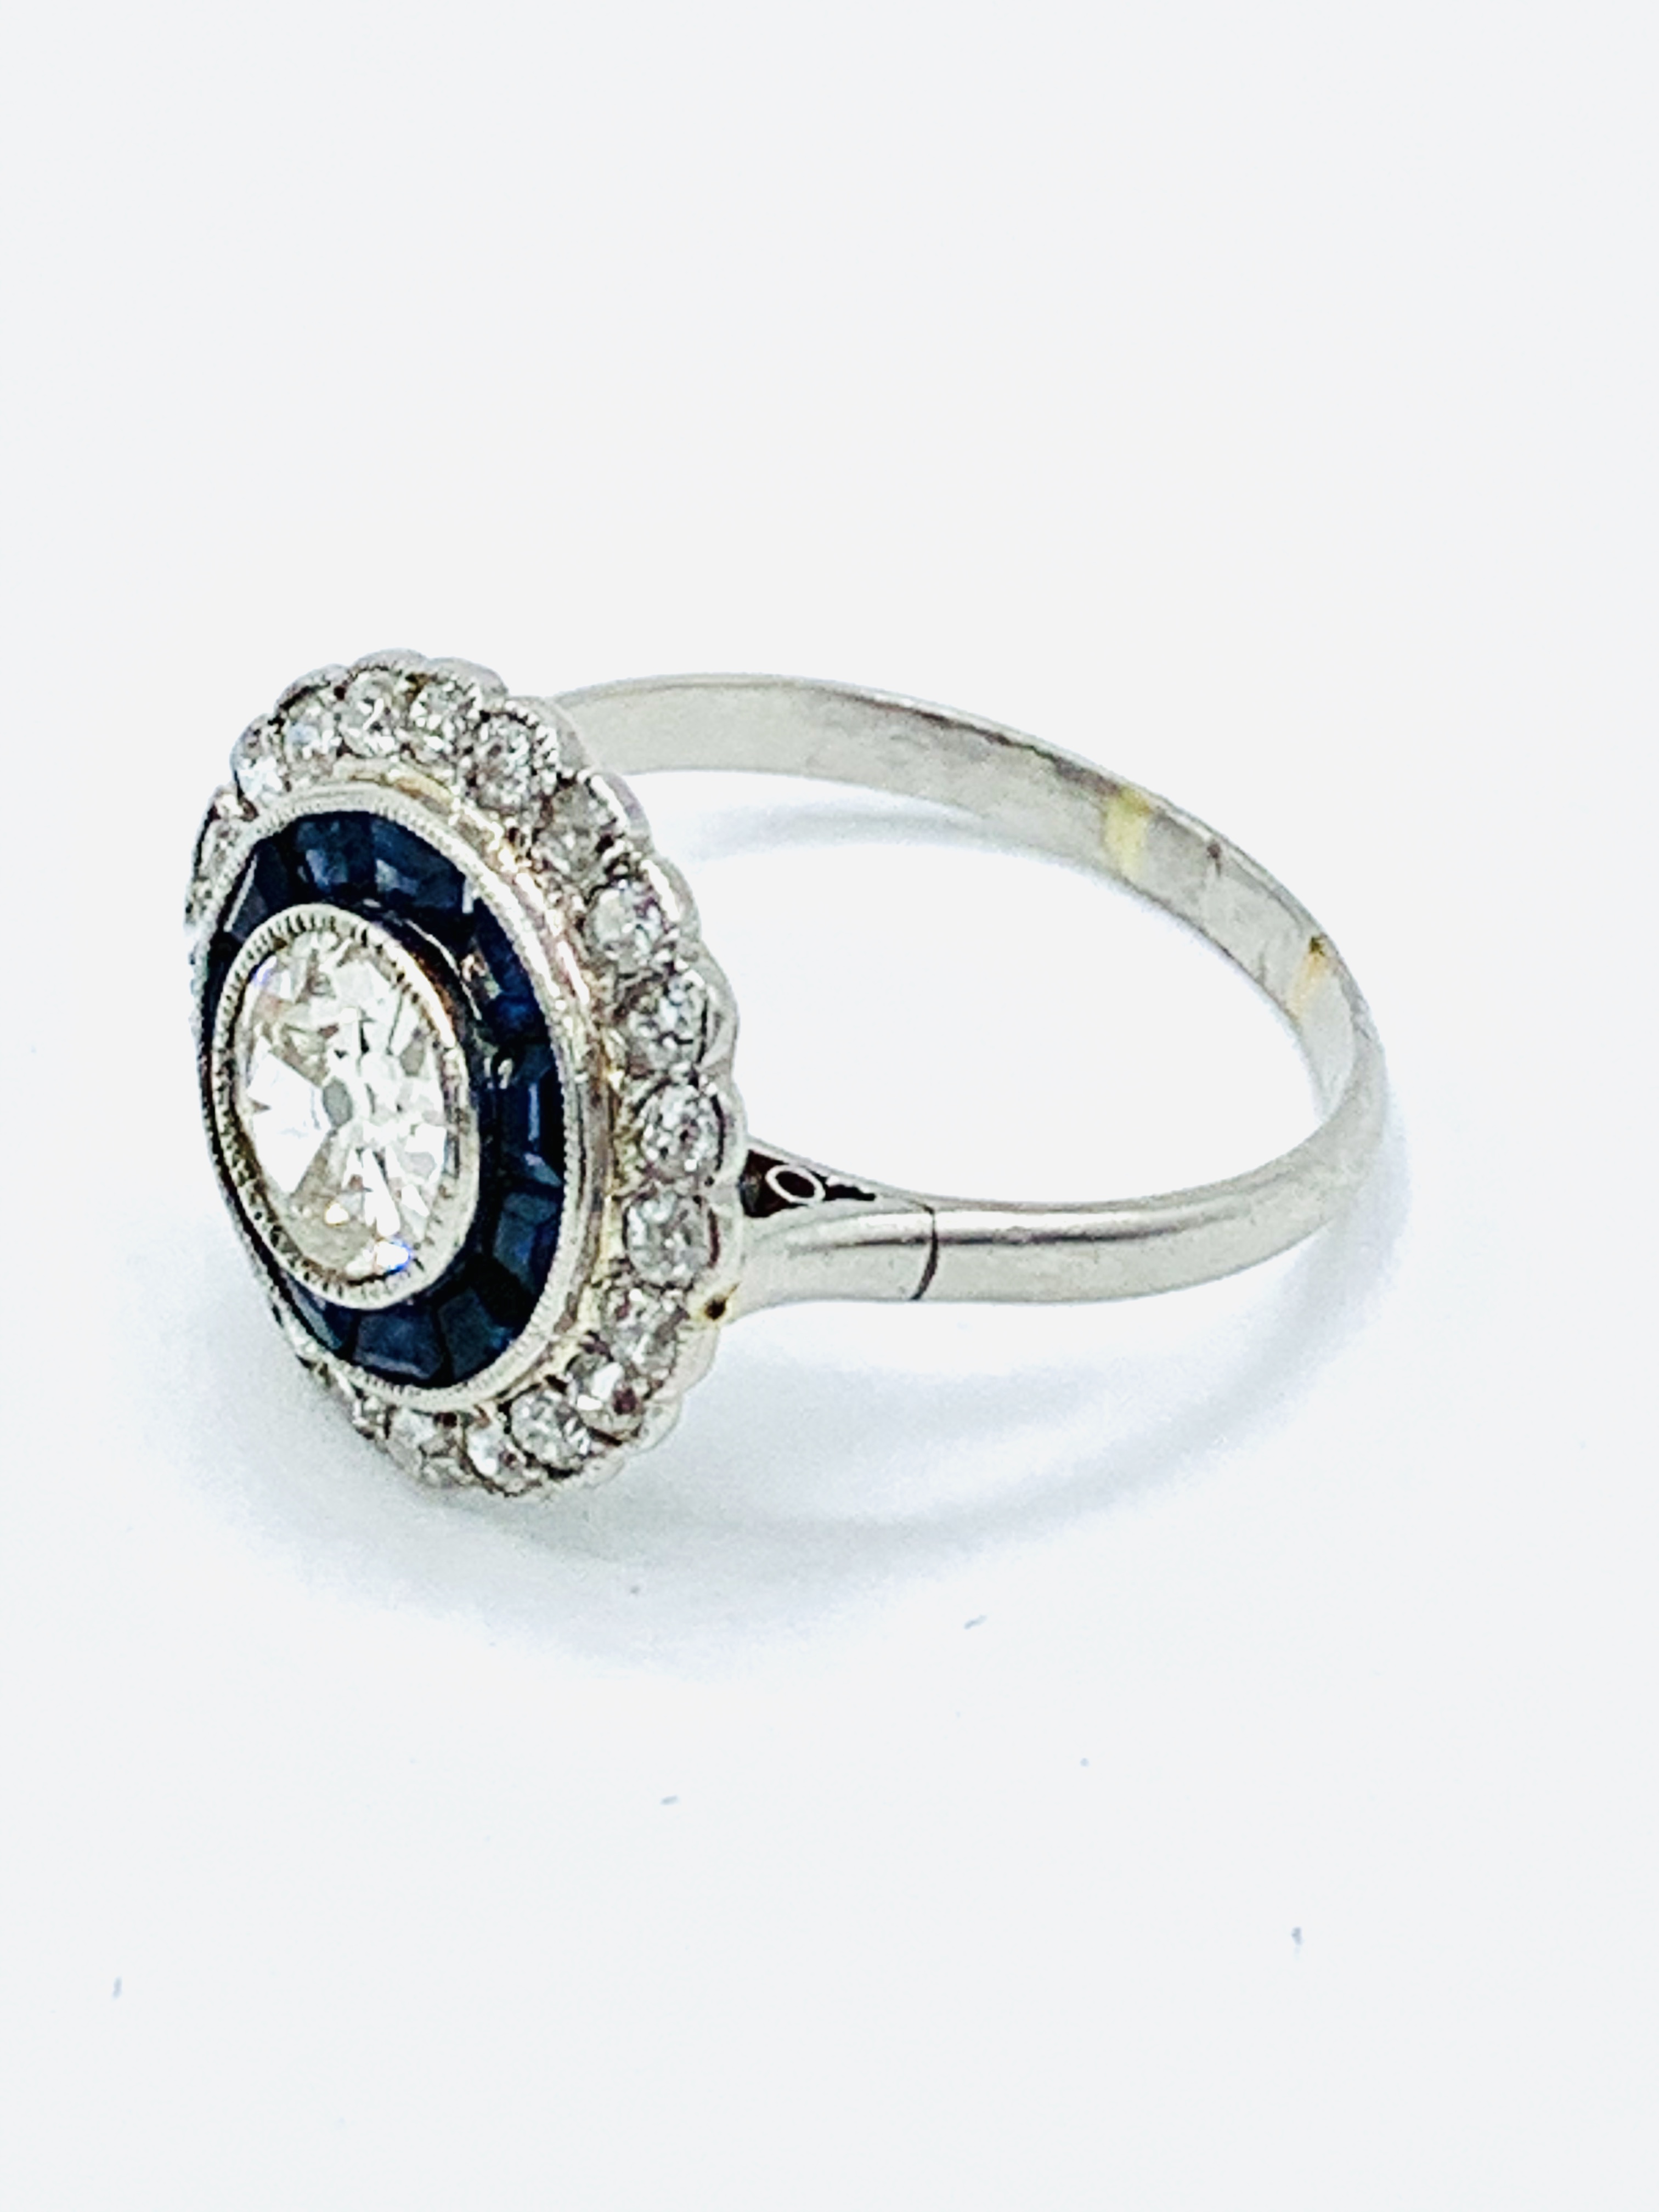 White gold, sapphire and diamond two row target ring. - Image 3 of 6